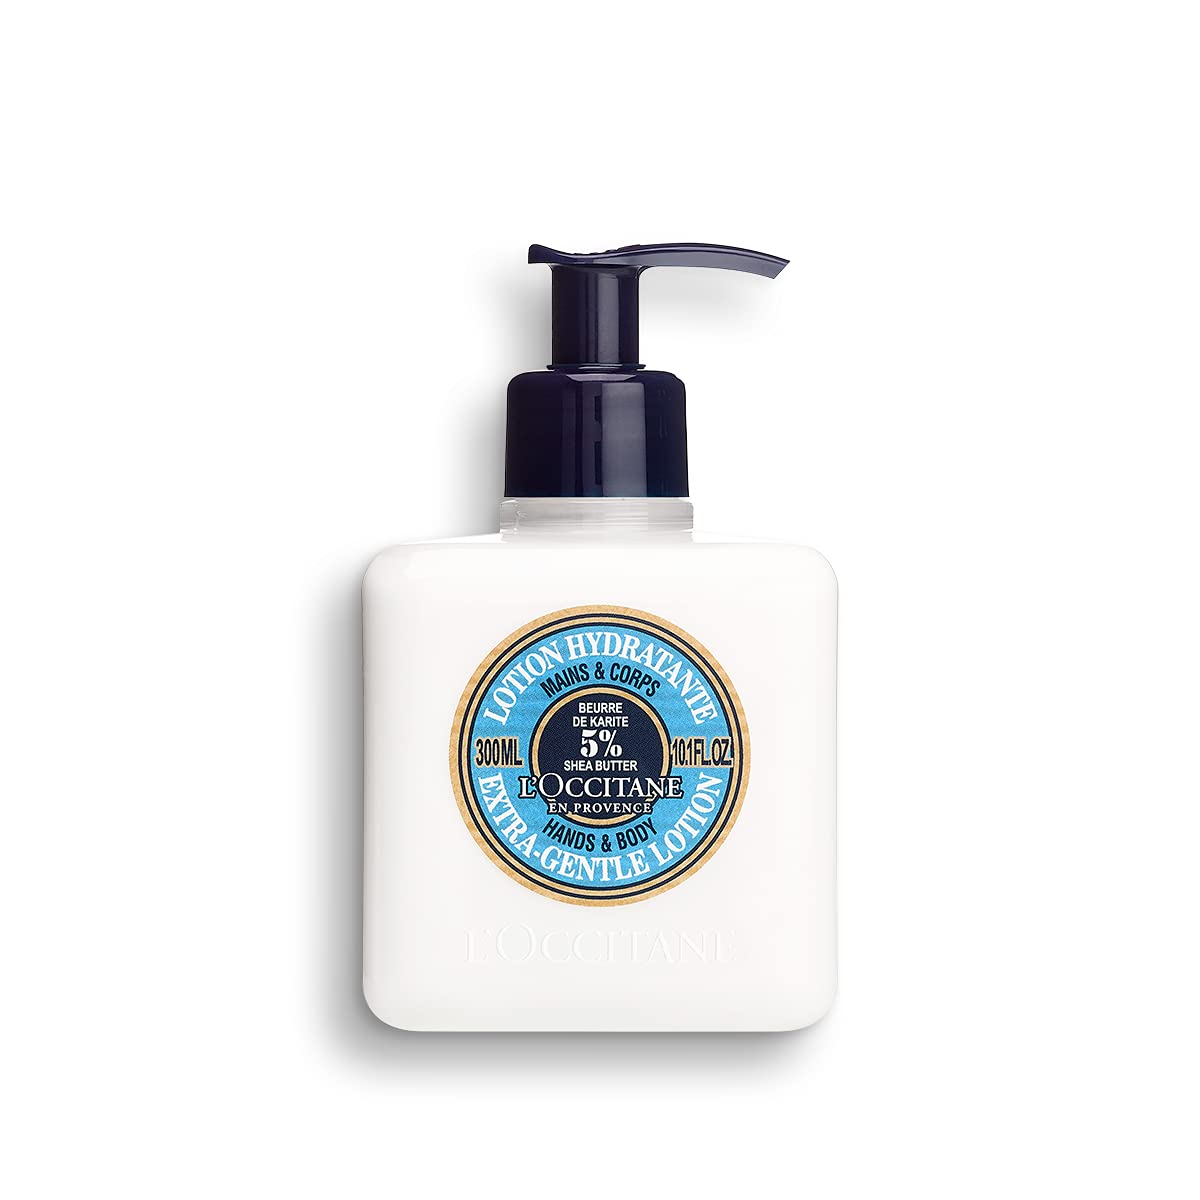 L'Occitane Extra-Gentle Lotion: Moisturizing, Comfort Skin, Fast-Absorbing Lotion, With 5% Organic Shea Butter, Fresh Scent, Vegan